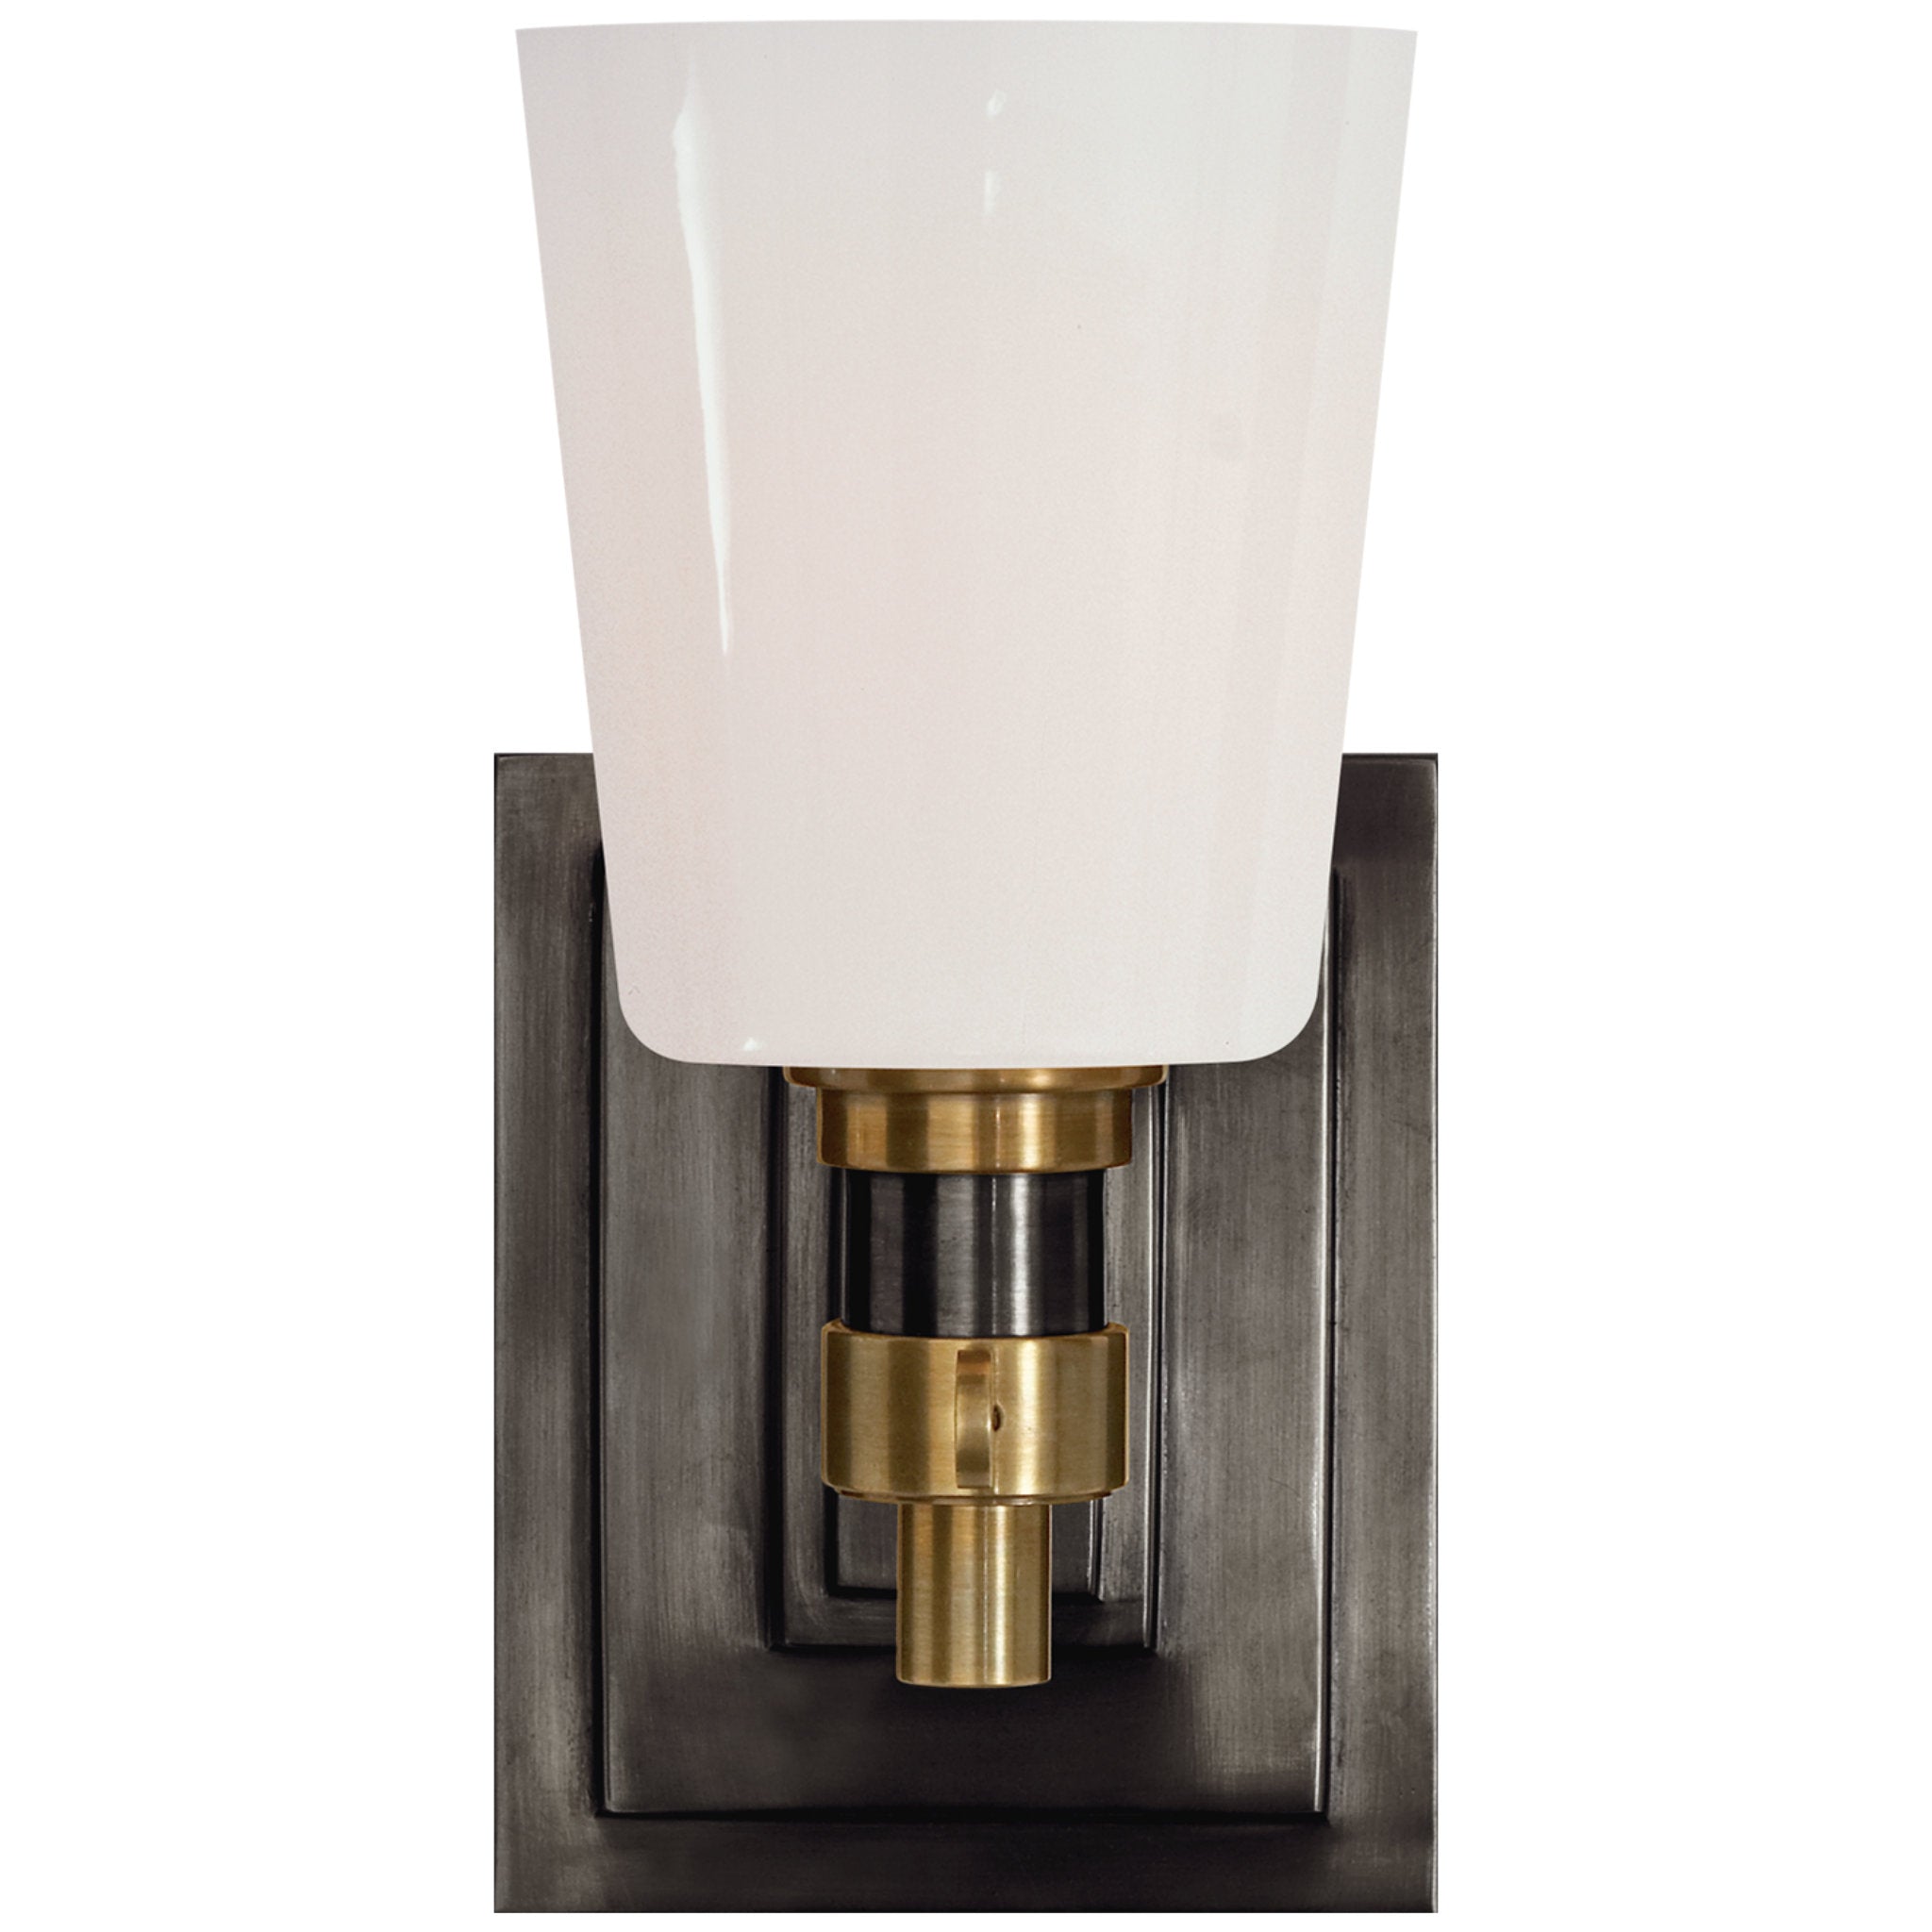 Comtesse Medium Sconce in Hand-Rubbed Antique Brass – Egg & Dart PDQ